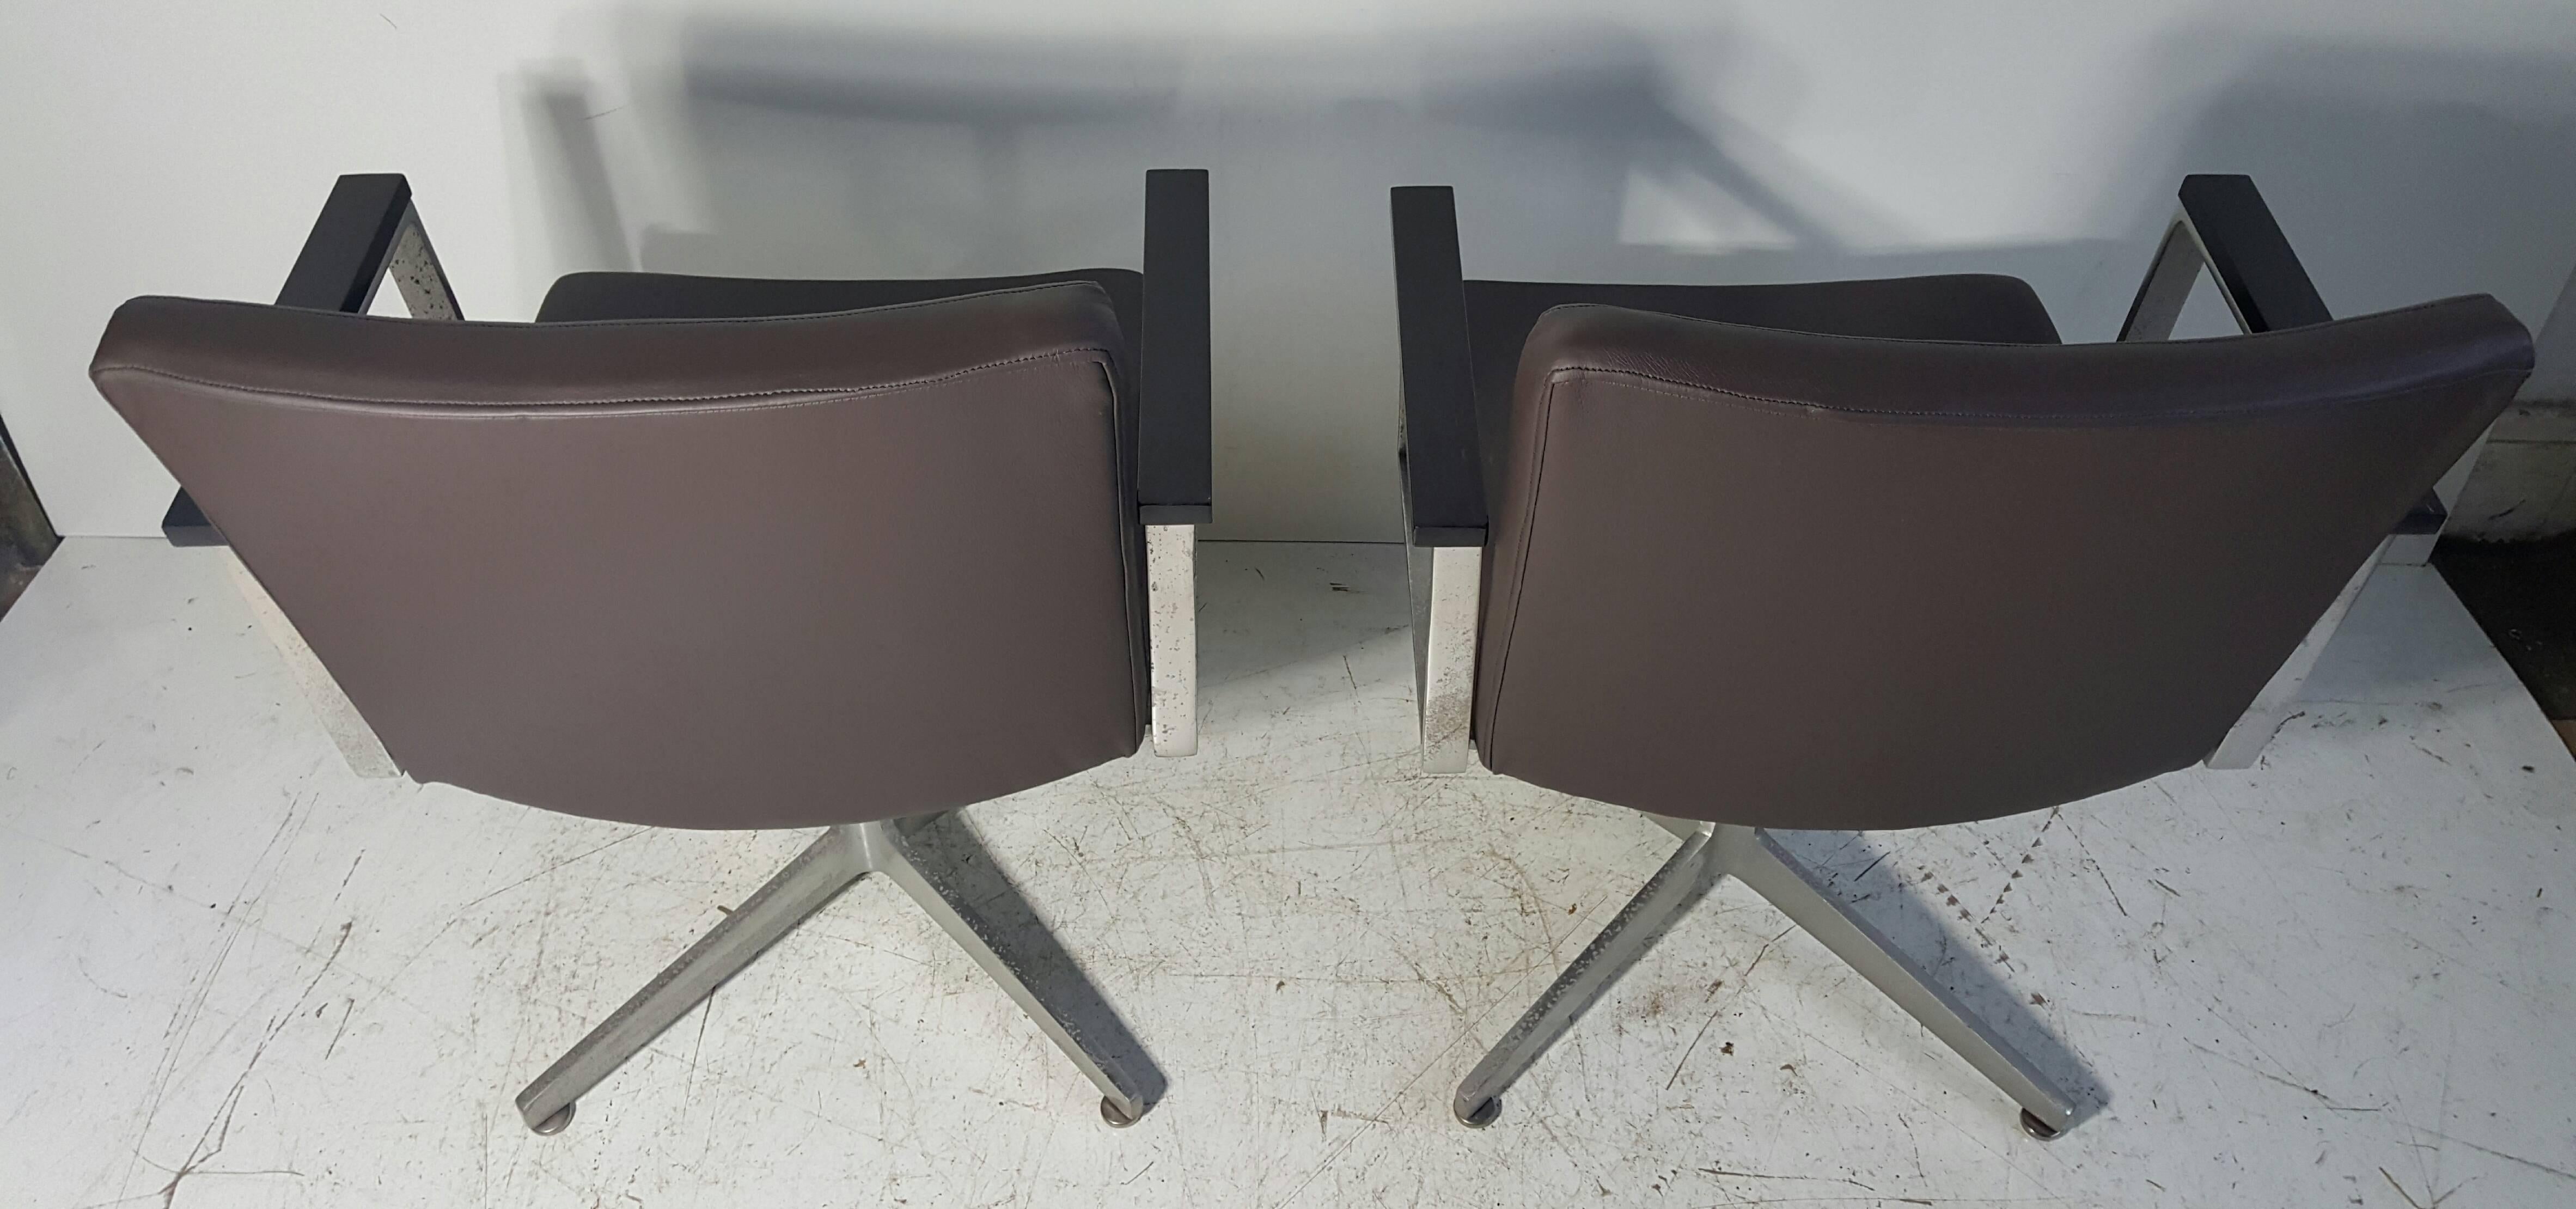 20th Century Aluminum and Leather Good Form Armchairs, Modernist, Machine Age For Sale